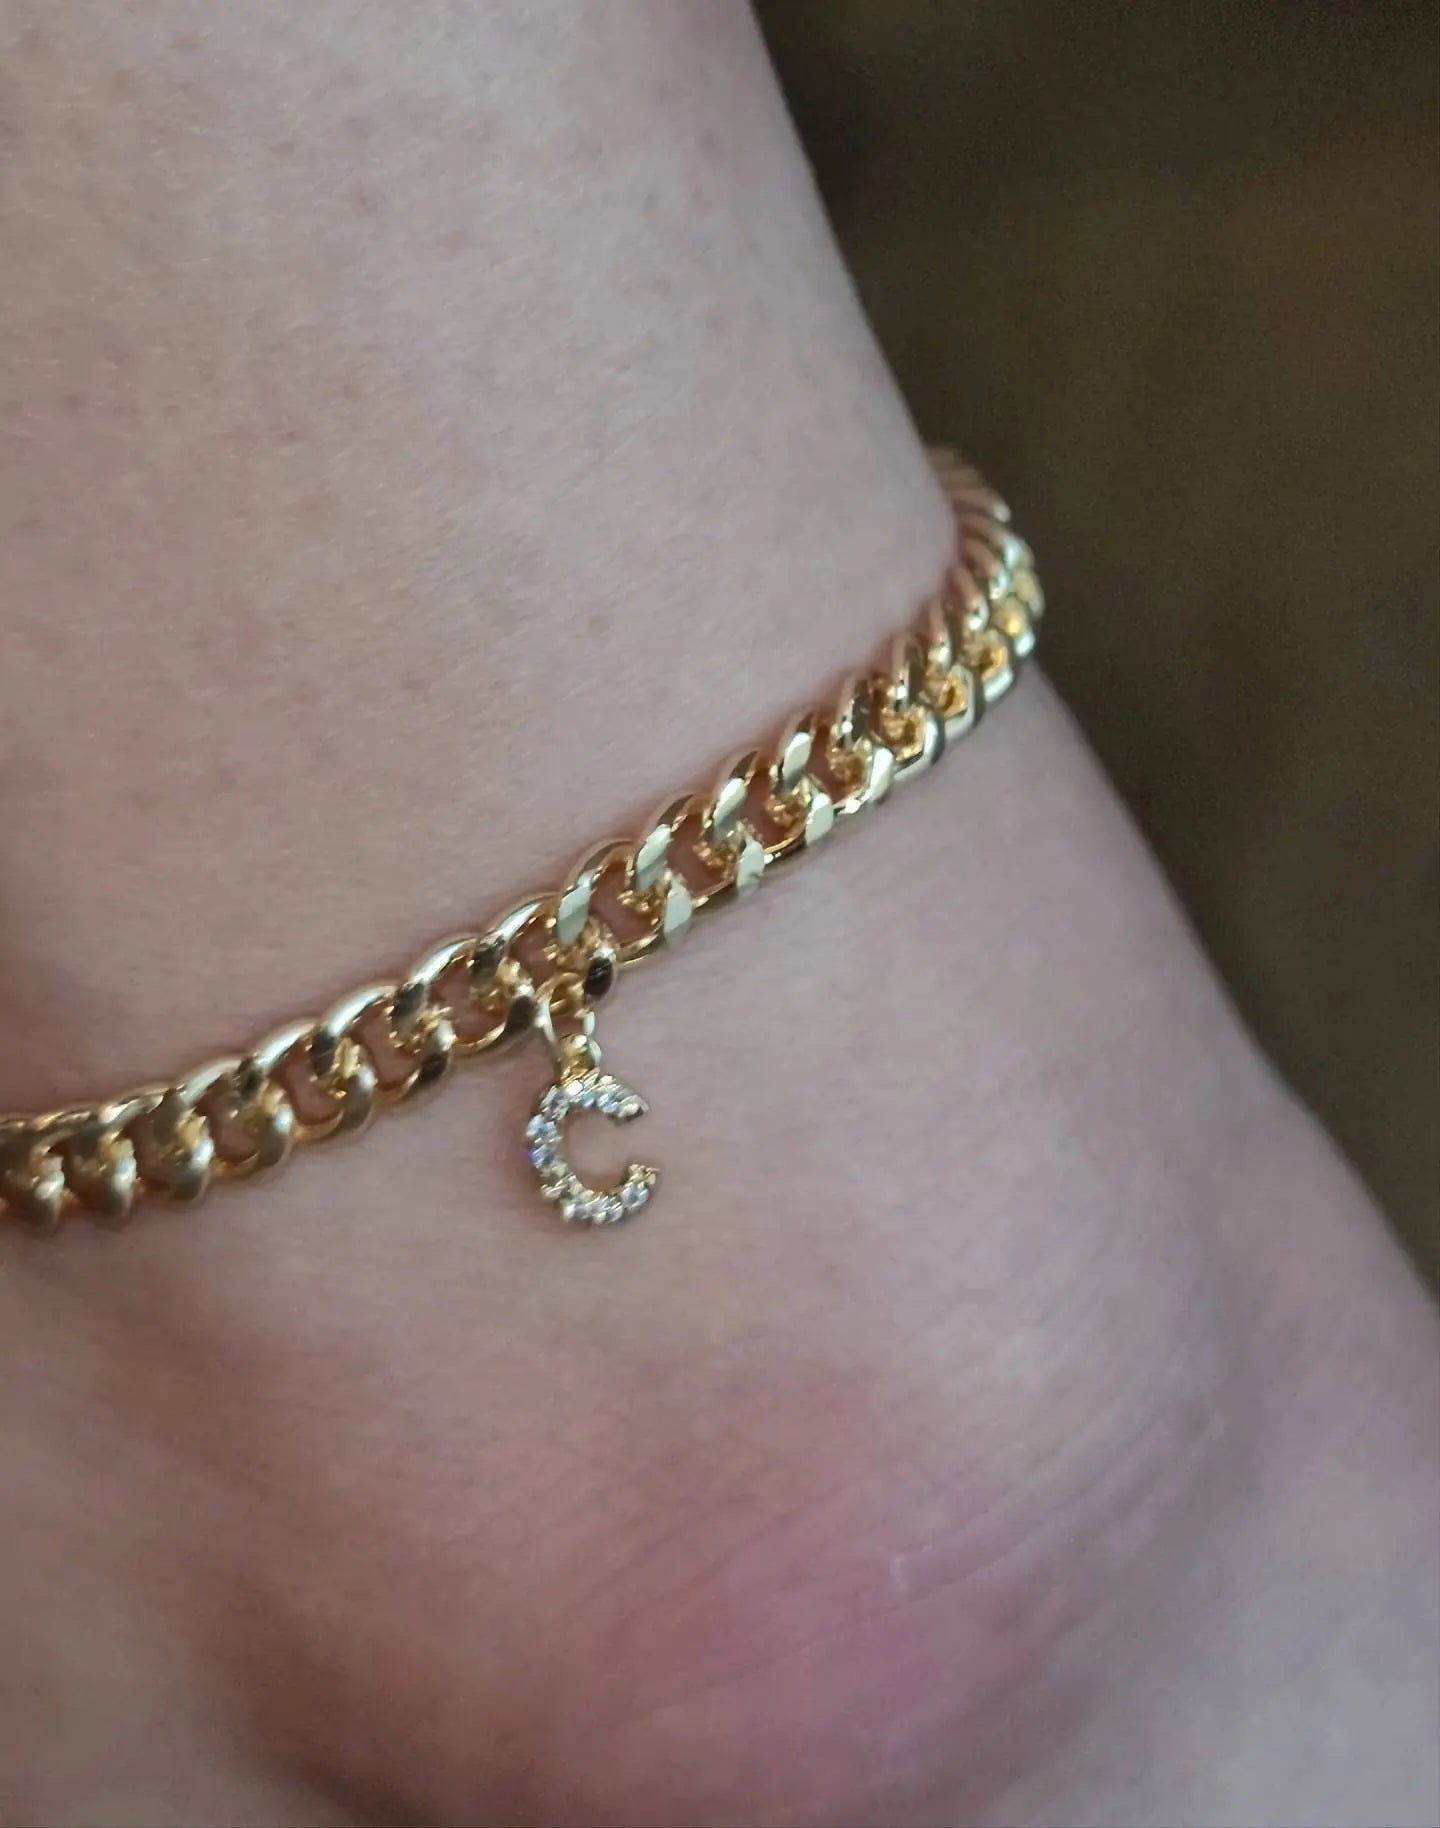 18K Gold Initial Curby Anklet, Custom Ankle Bracelet, A - Z Crystal Cubic Zirconia Letter Anklet, Gold Chain, Anklebone Beauty, Personalized JettsJewelers